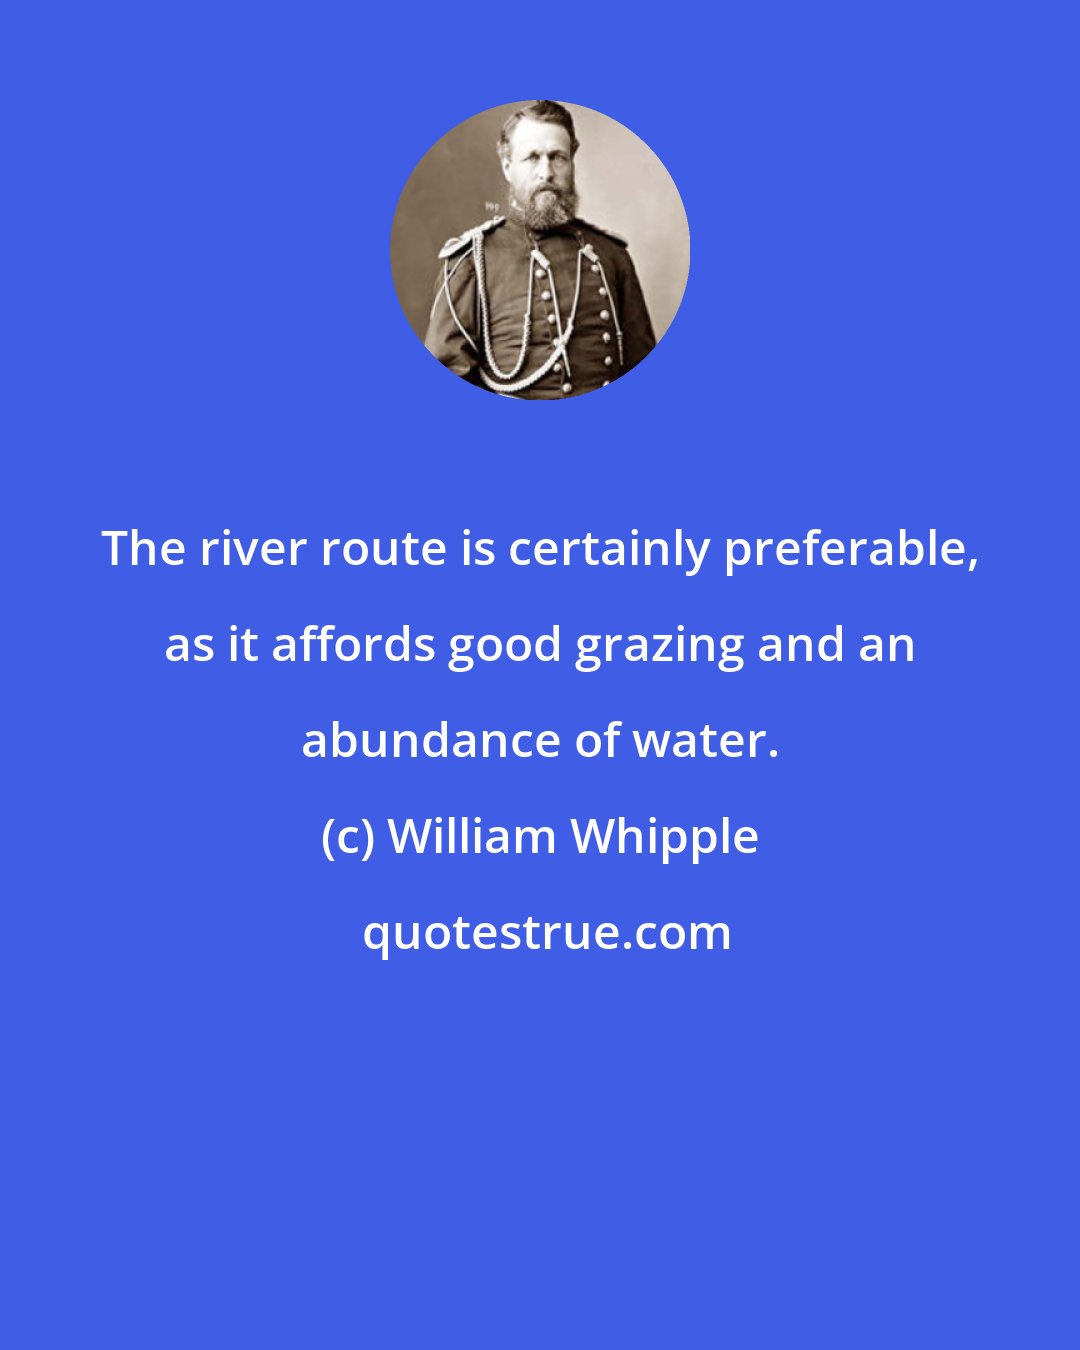 William Whipple: The river route is certainly preferable, as it affords good grazing and an abundance of water.